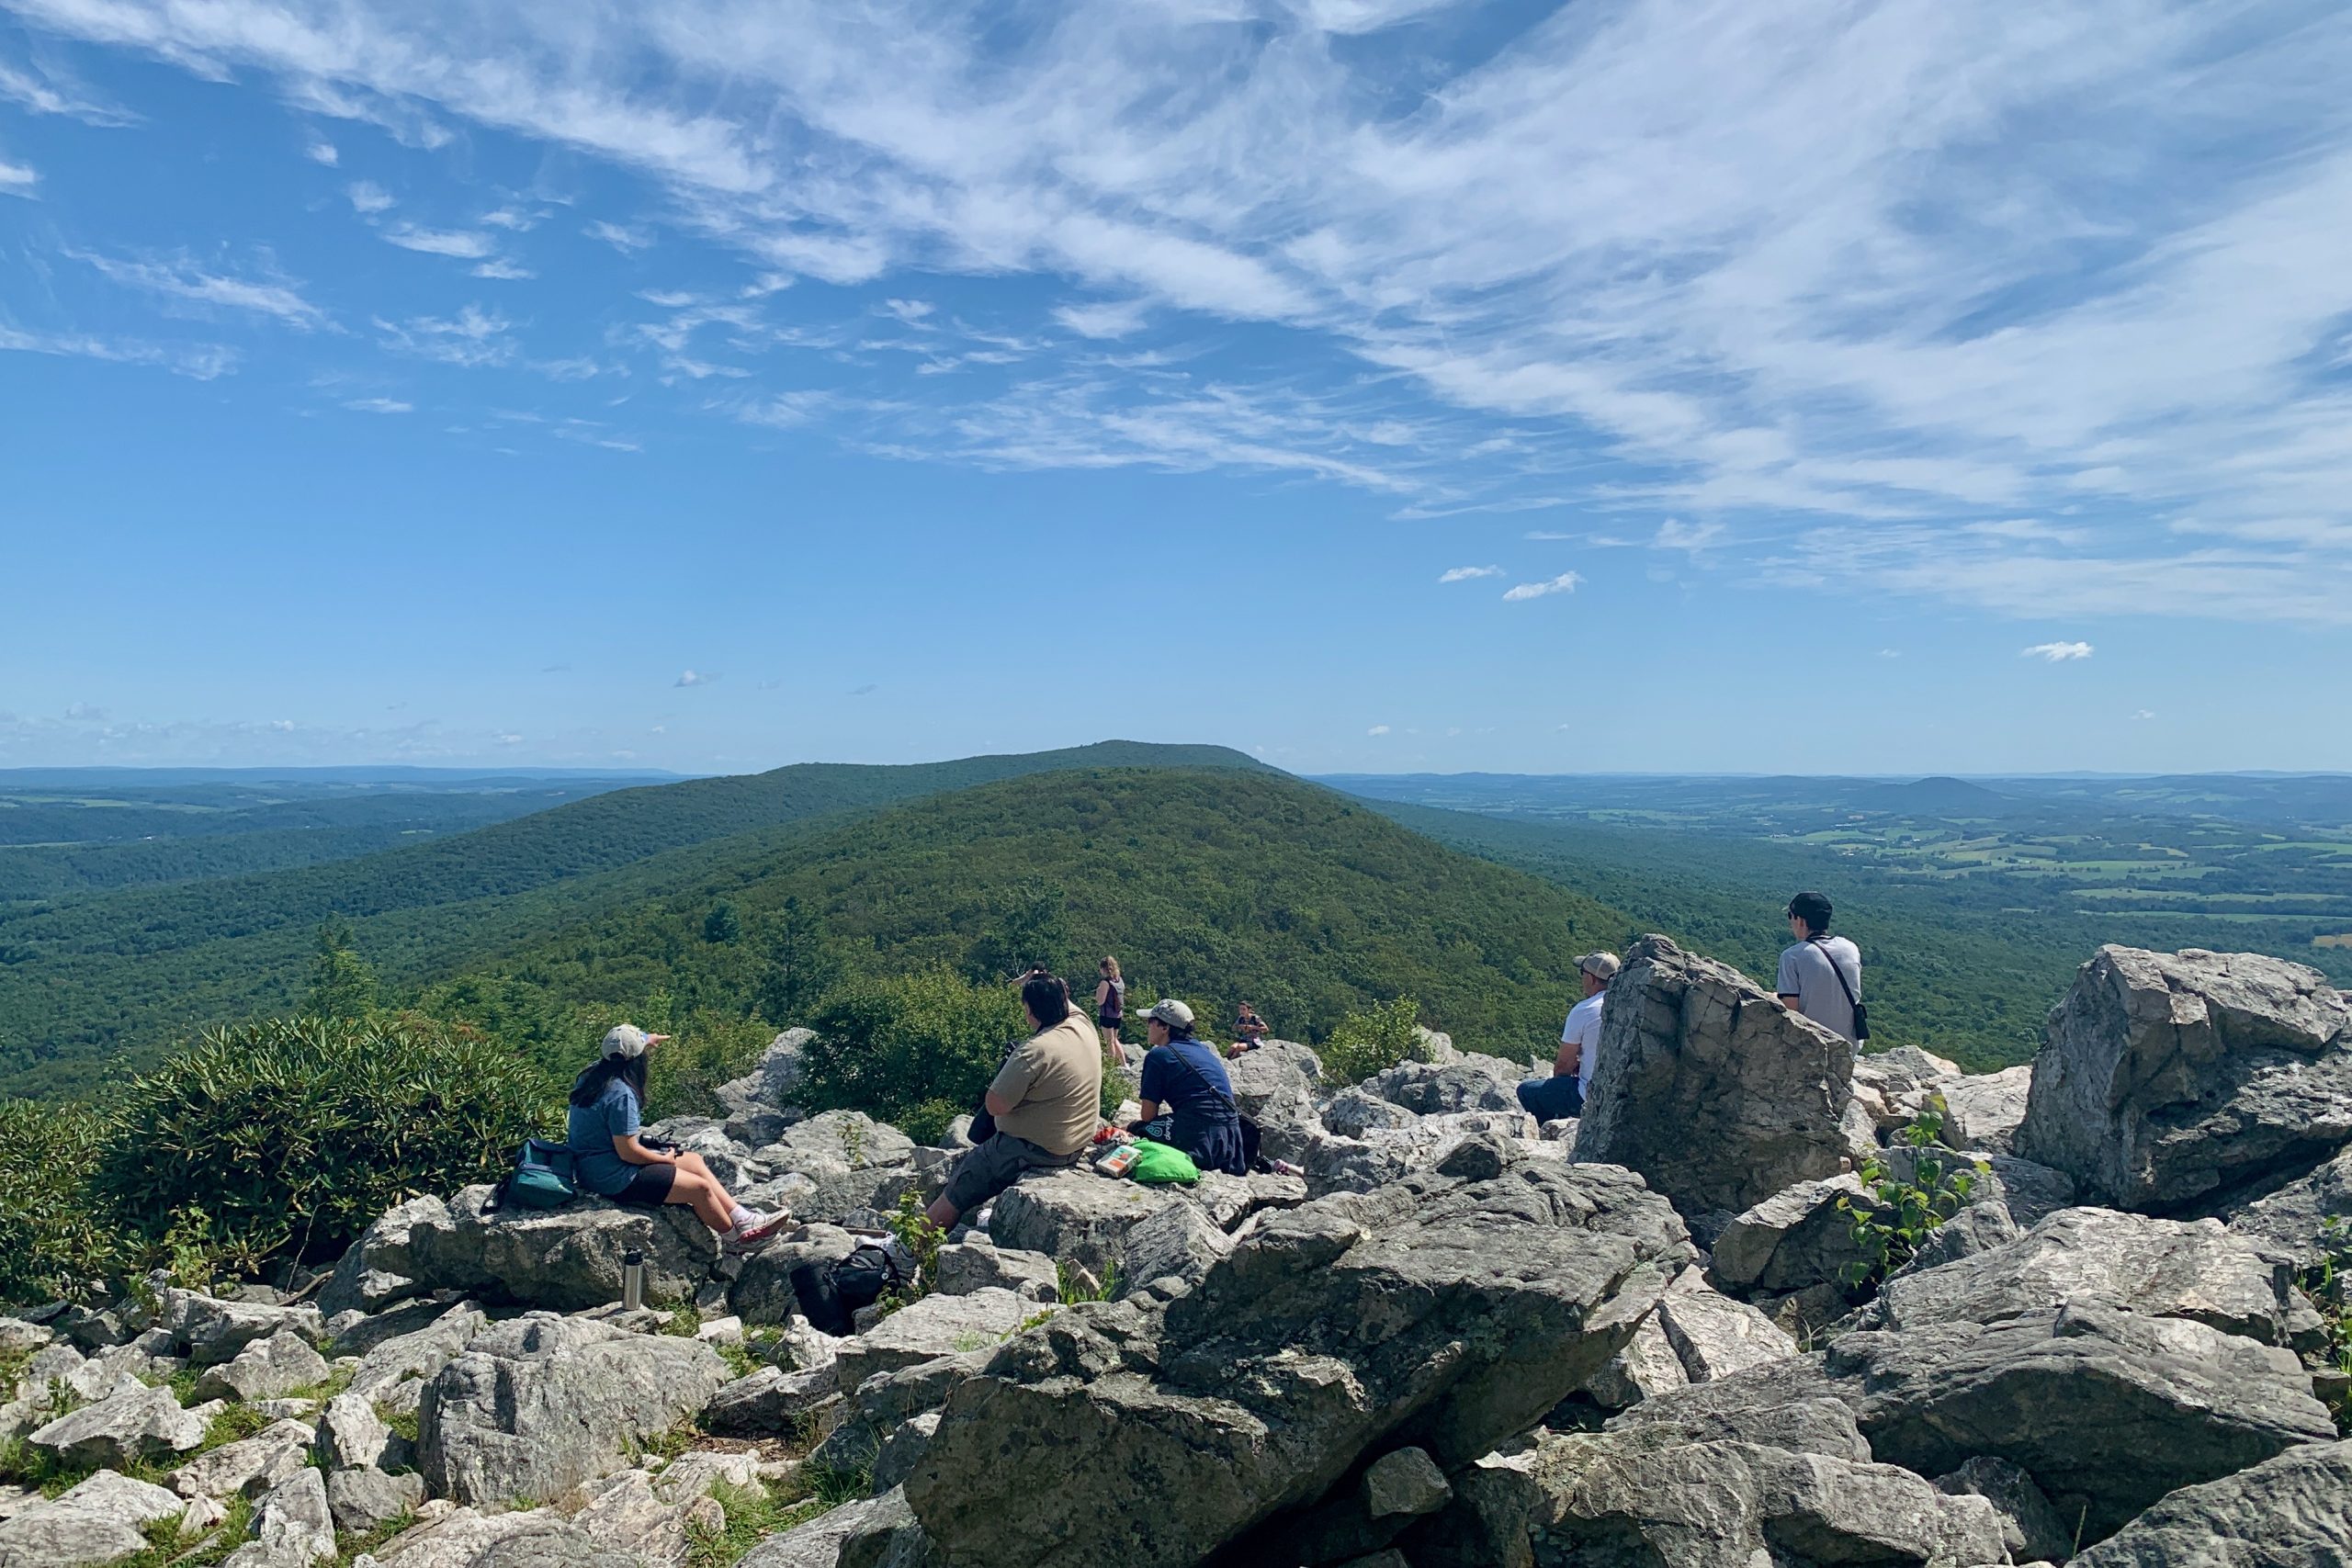 You are currently viewing North Lookout, Hawk Mountain Sanctuary, Kempton, PA, États-Unis